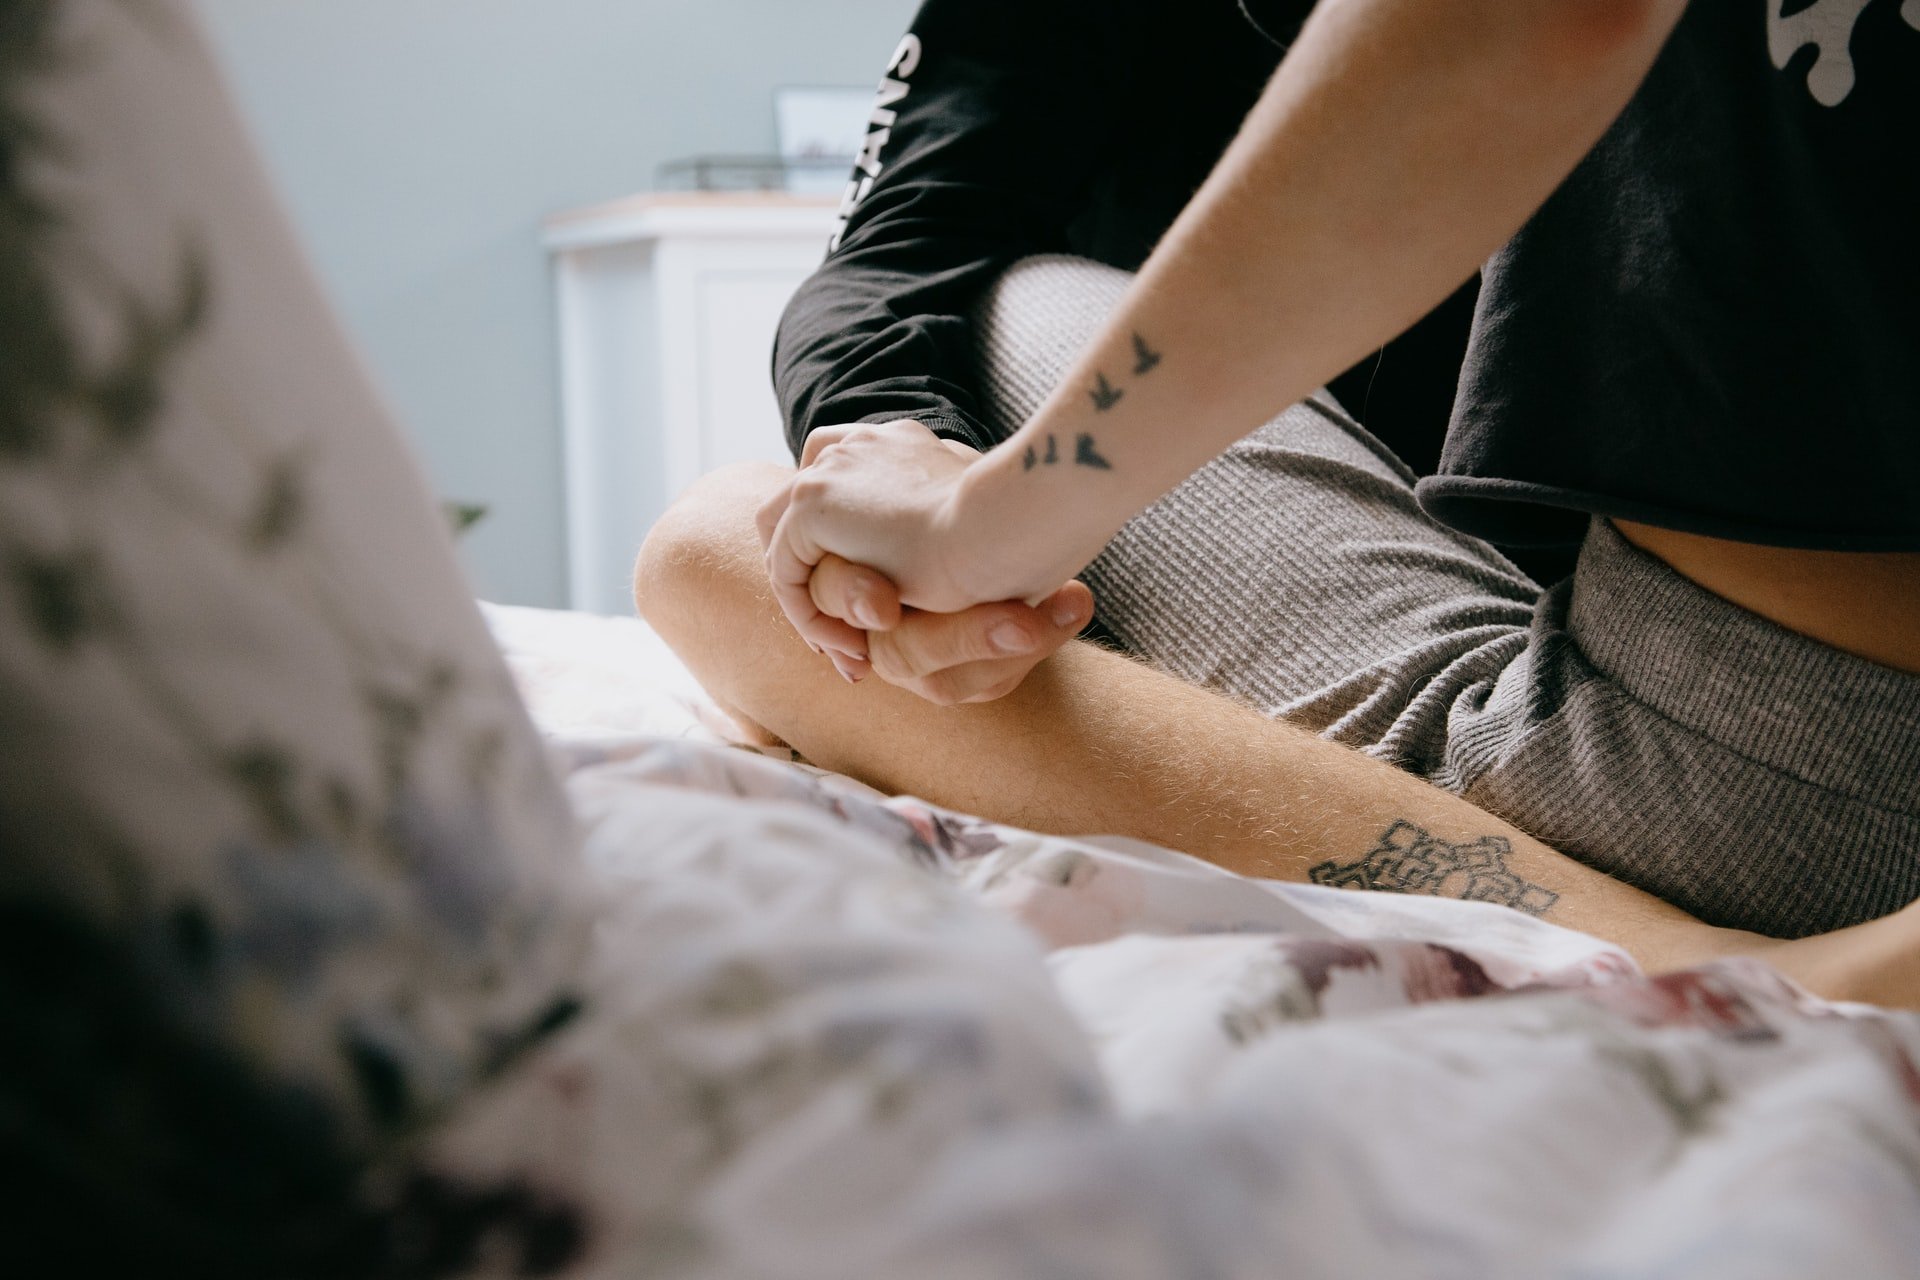 Two people holding hands | Source: Unsplash